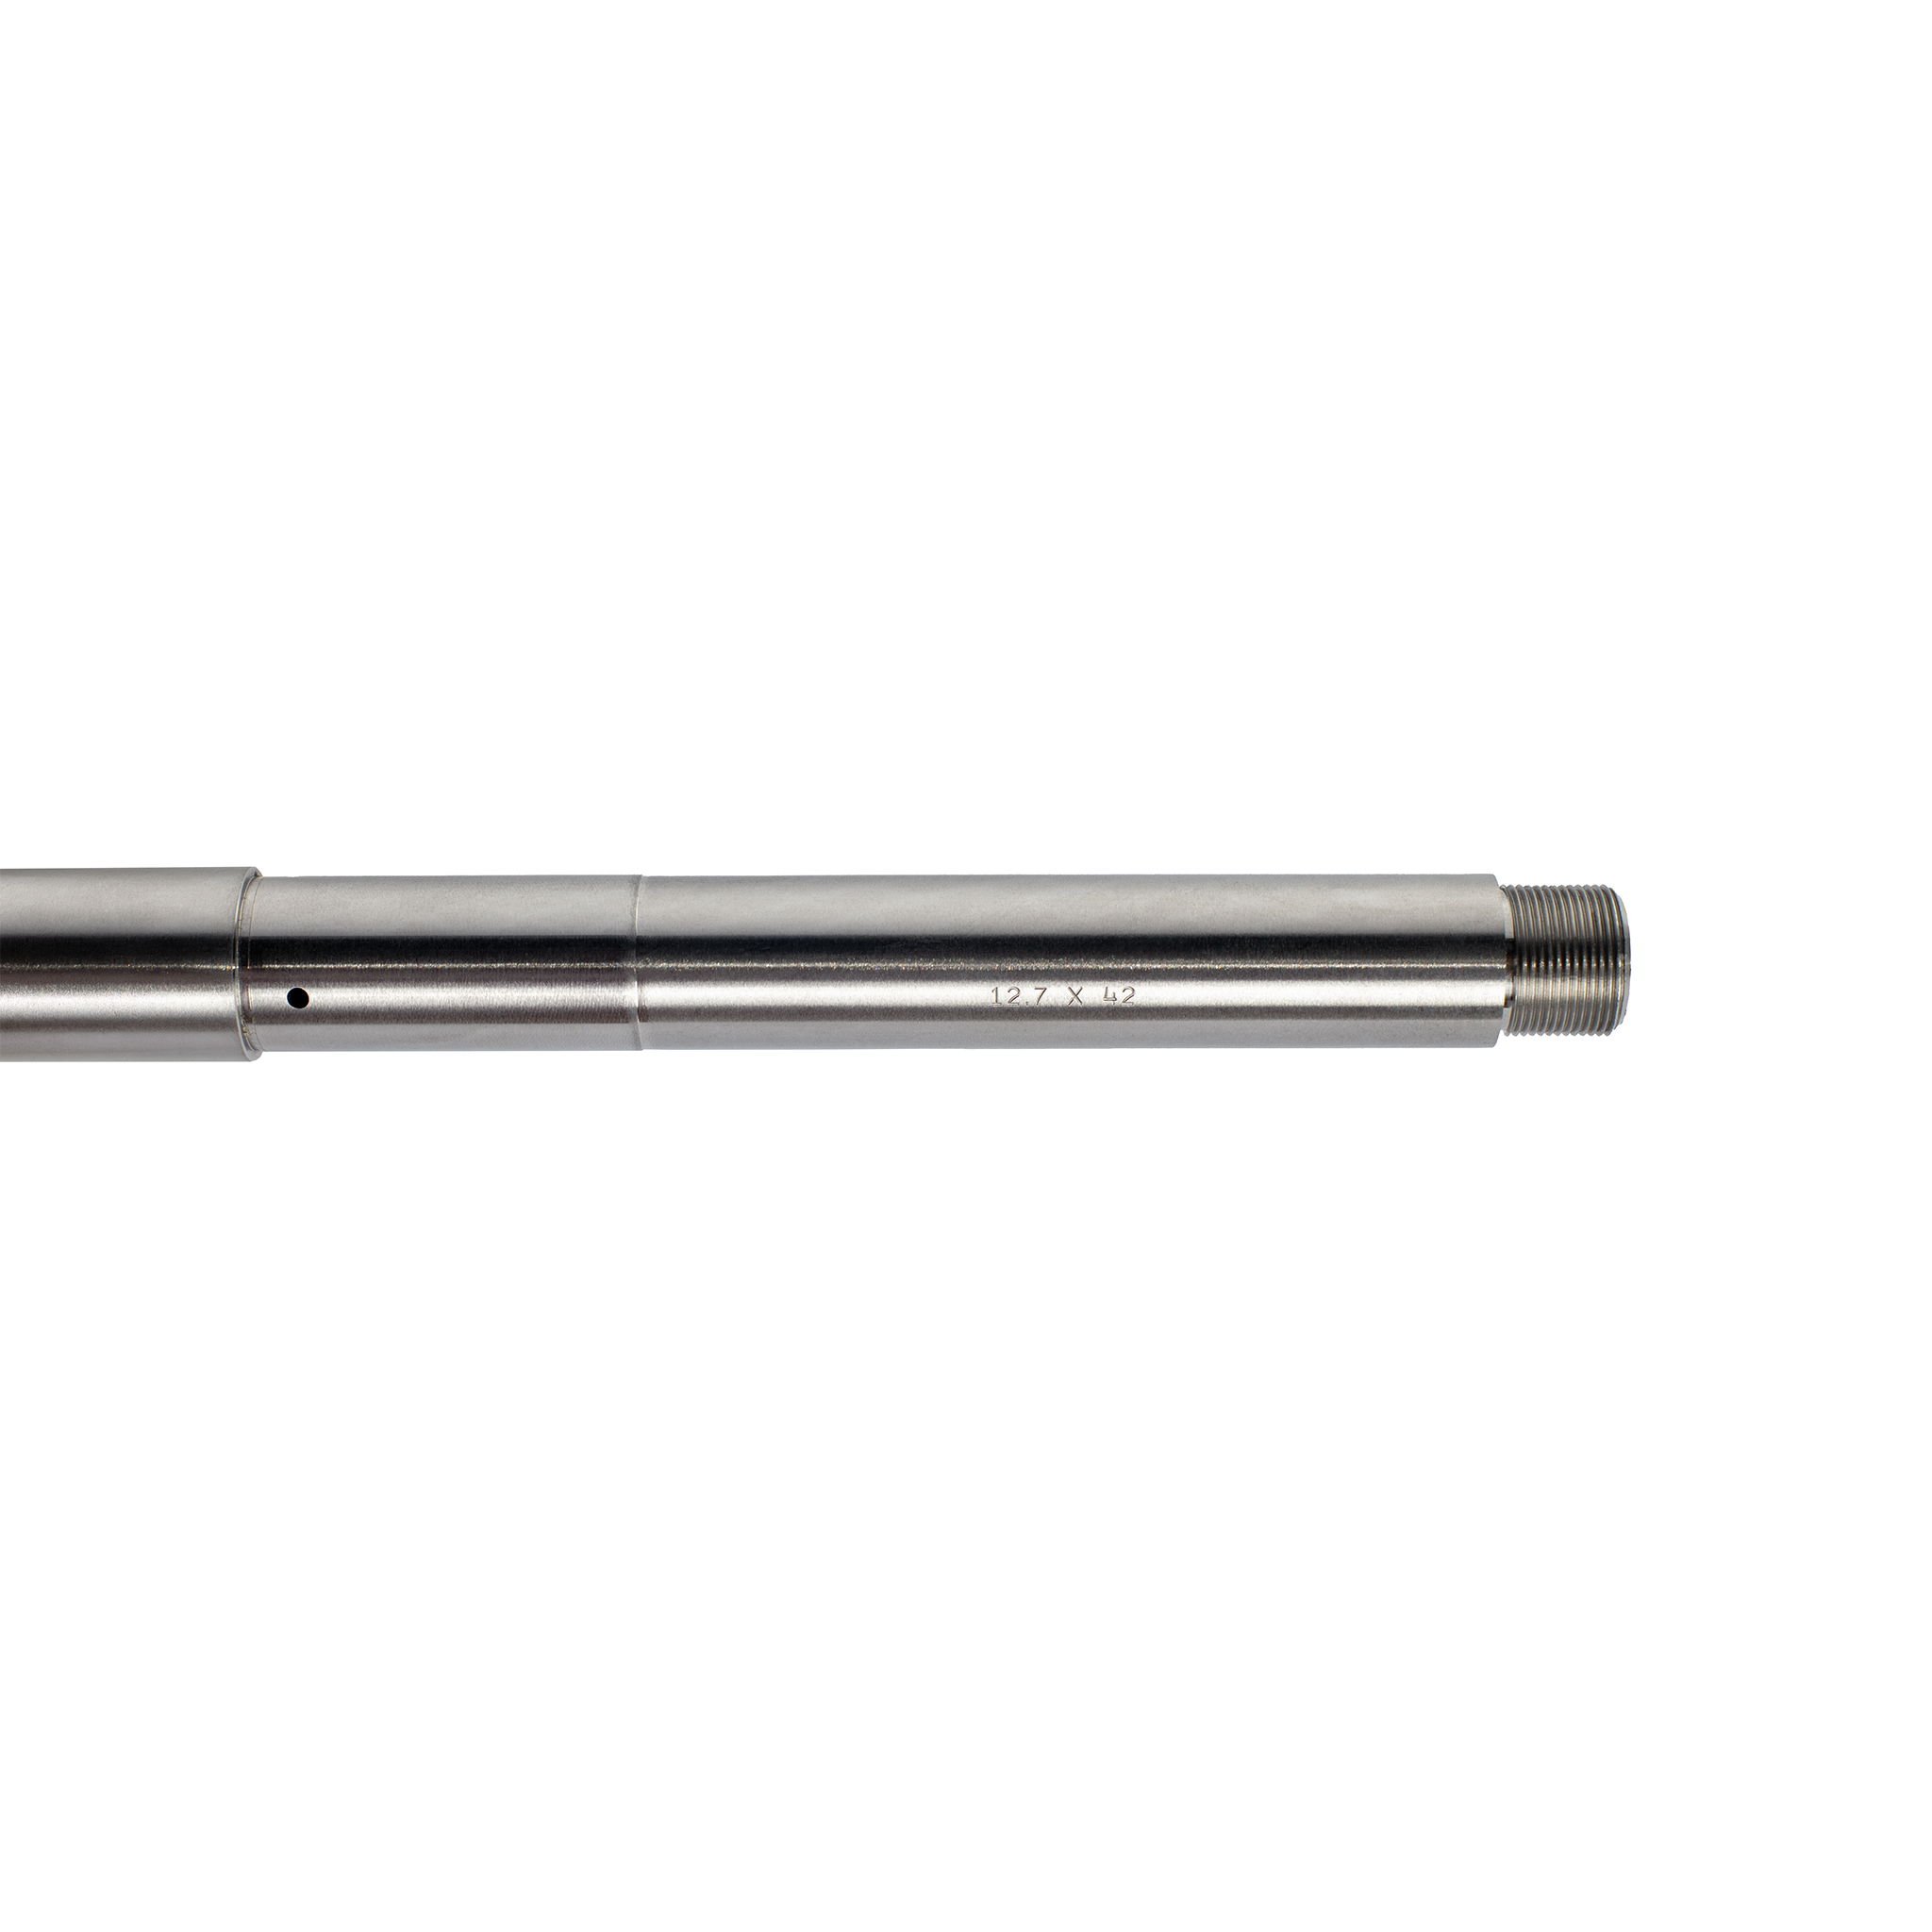 16" 50 BEOWULF Barrel - Satern - Heavy - Stainless - 1x20 - 3/4x24-img-1